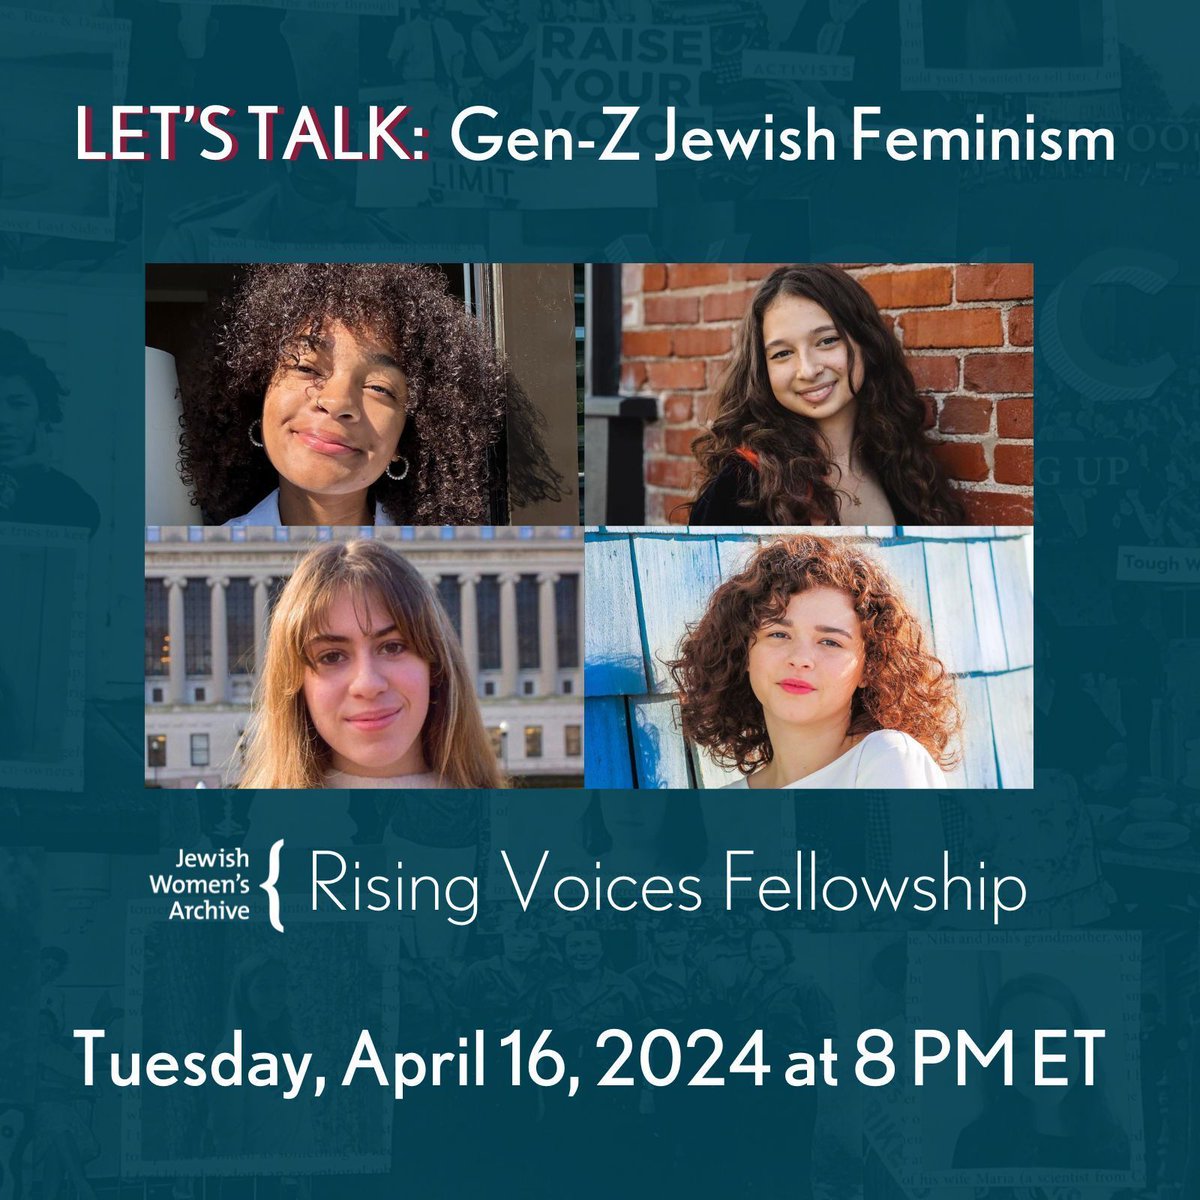 Tuesday! Join JWA virtually on April 16, at 8 PM ET for LET'S TALK: Gen-Z Jewish Feminism! Hear from four alums of JWA’s teen Rising Voices Fellowship about their feminist Jewish journeys and the issues that are important to them today. Register: buff.ly/3vrx8K0